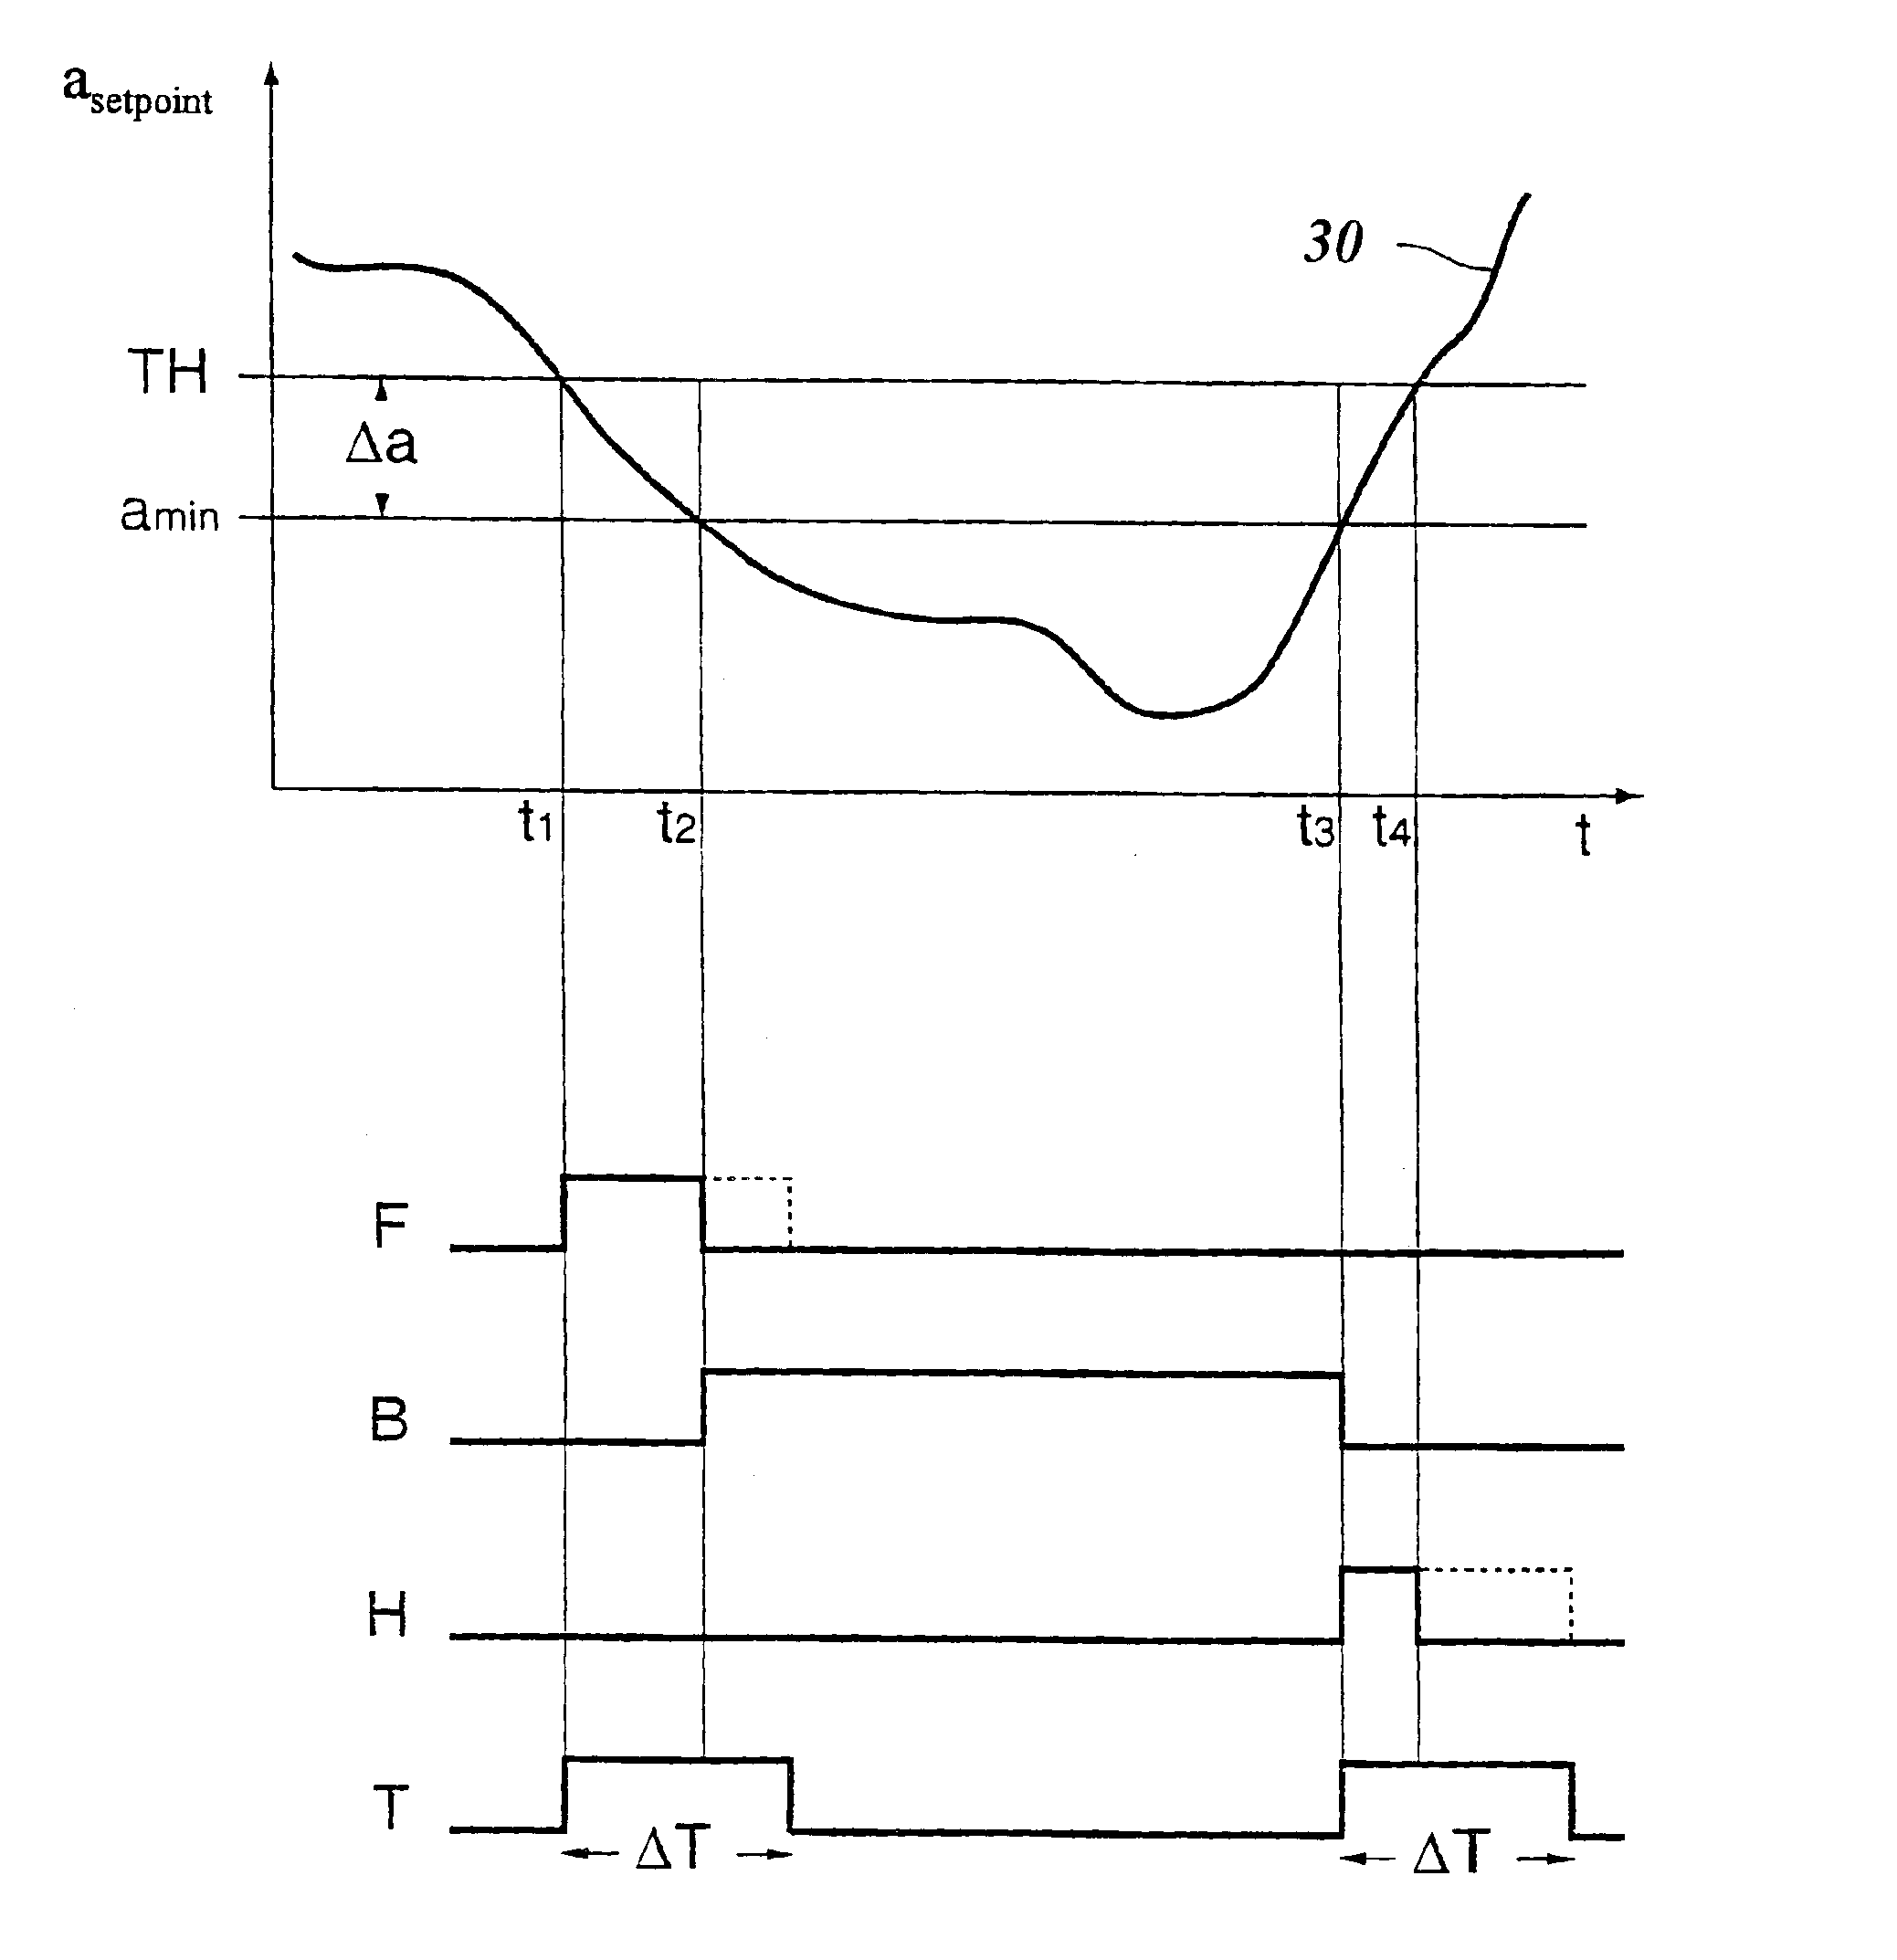 Method for regulating the speed of a motor vehicle